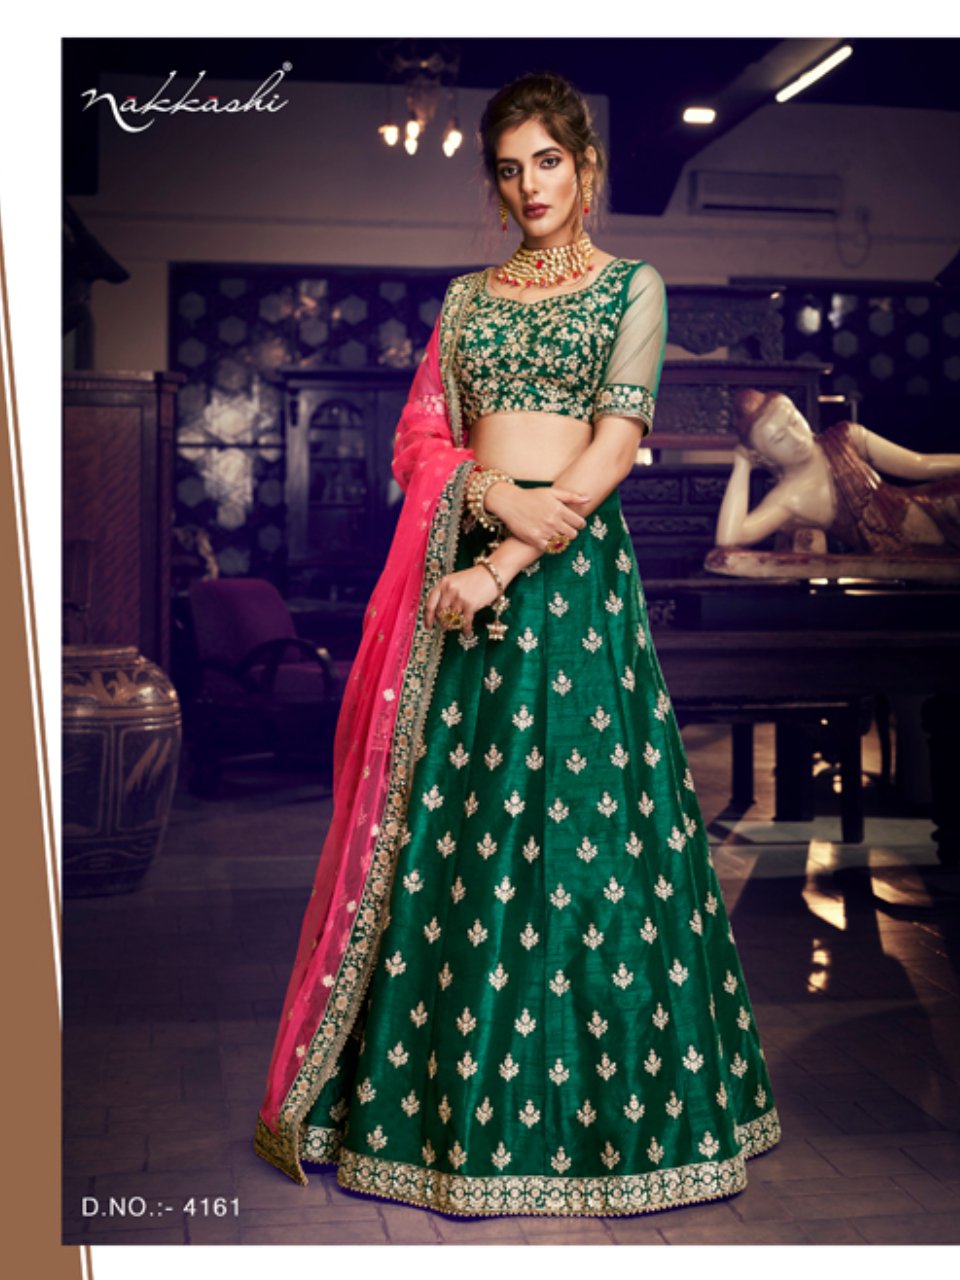 What are the latest bottle green lehenga designs for brides-to-be? - Quora